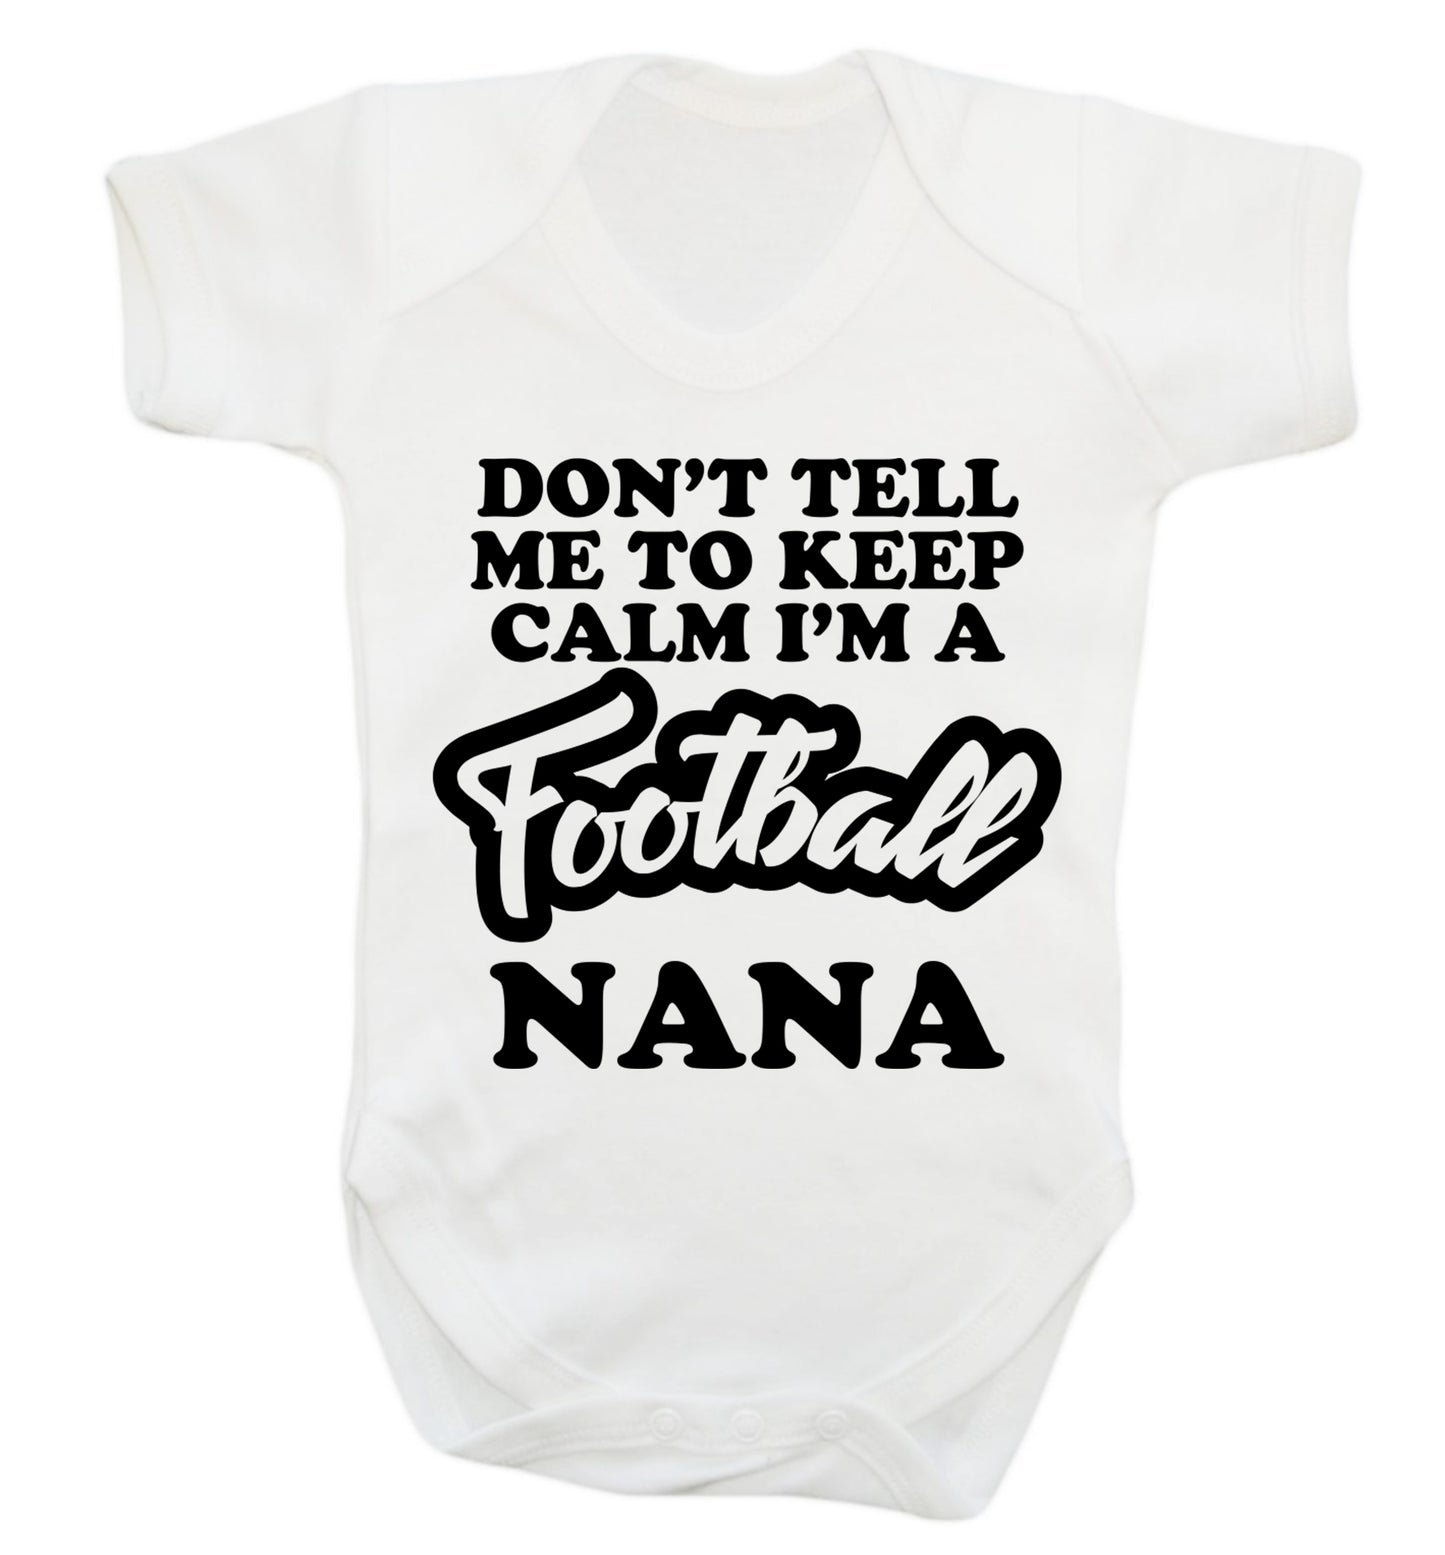 Don't tell me to keep calm I'm a football nana Baby Vest white 18-24 months